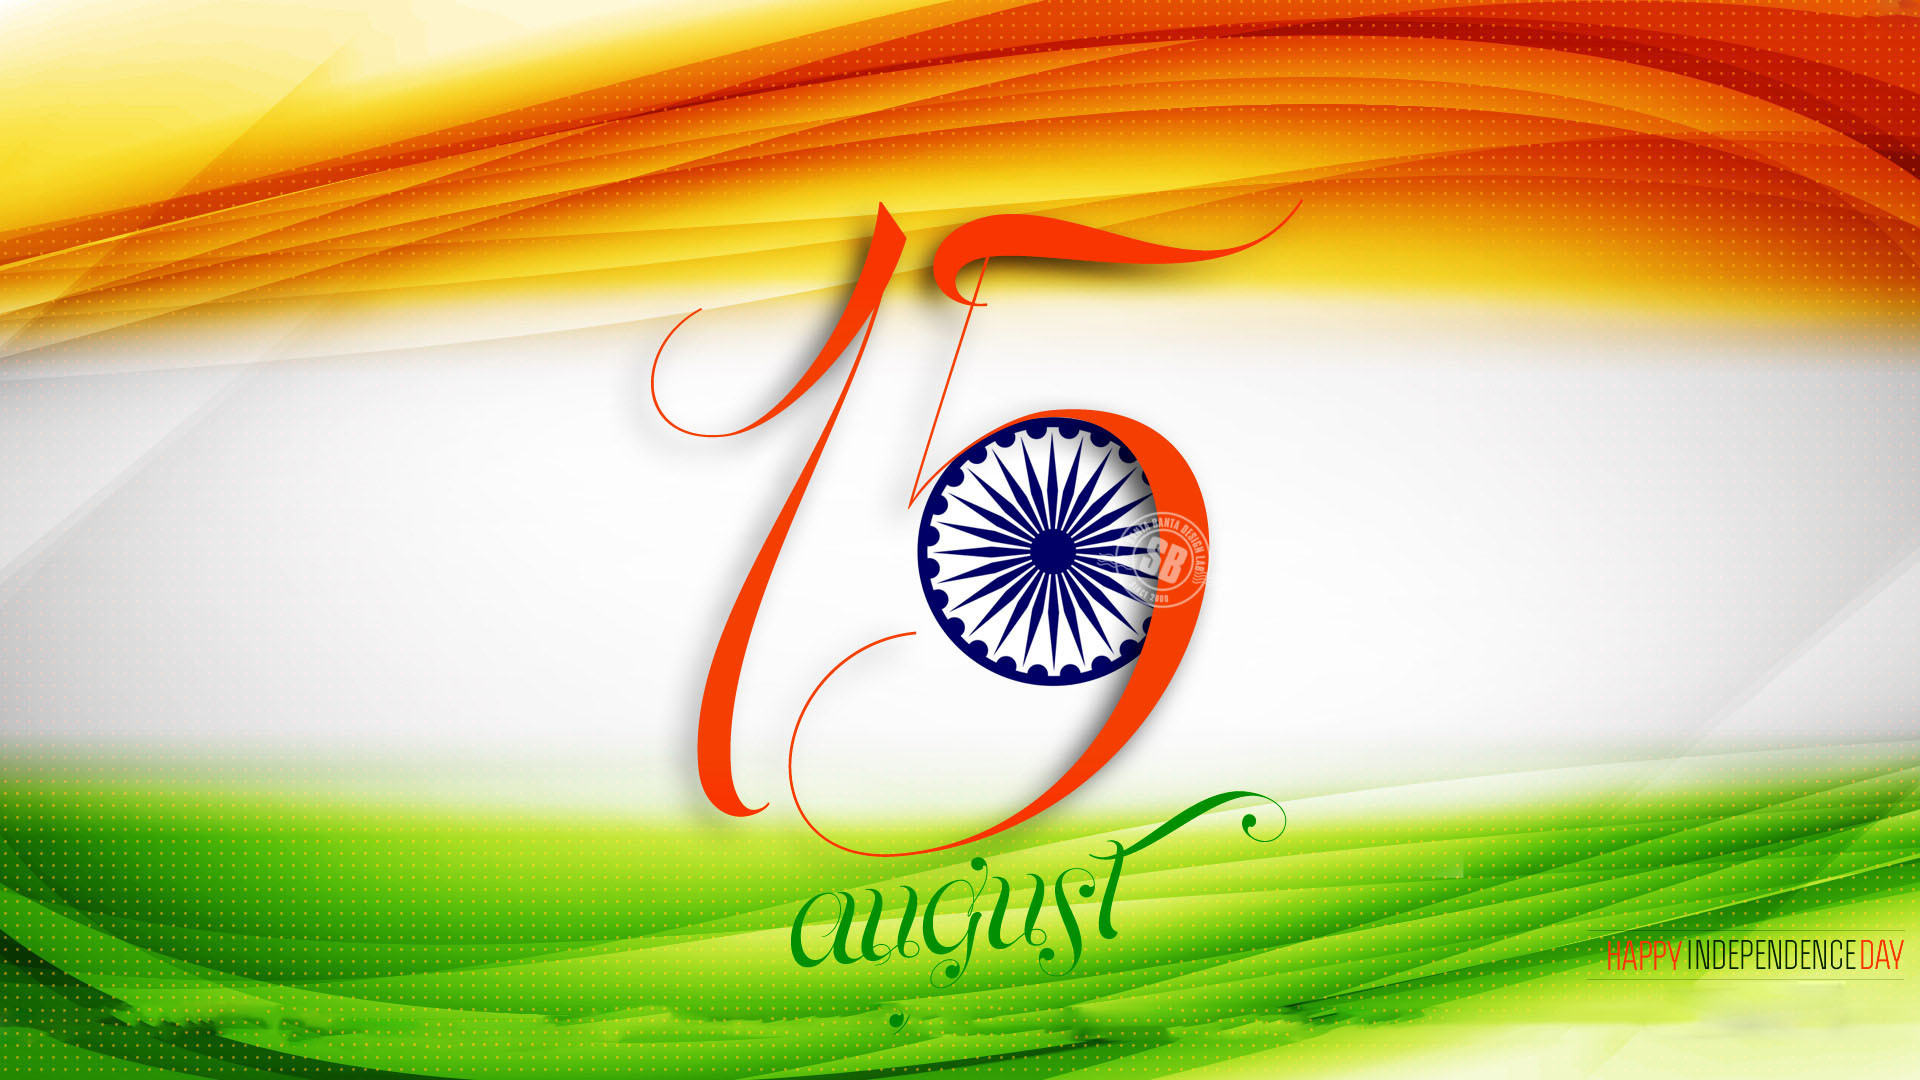 1920x1080 India Independence Day HD Wallpapers Whatsapp Messages and Greeting Cards.  15 August is very important for all Indian all around the world.